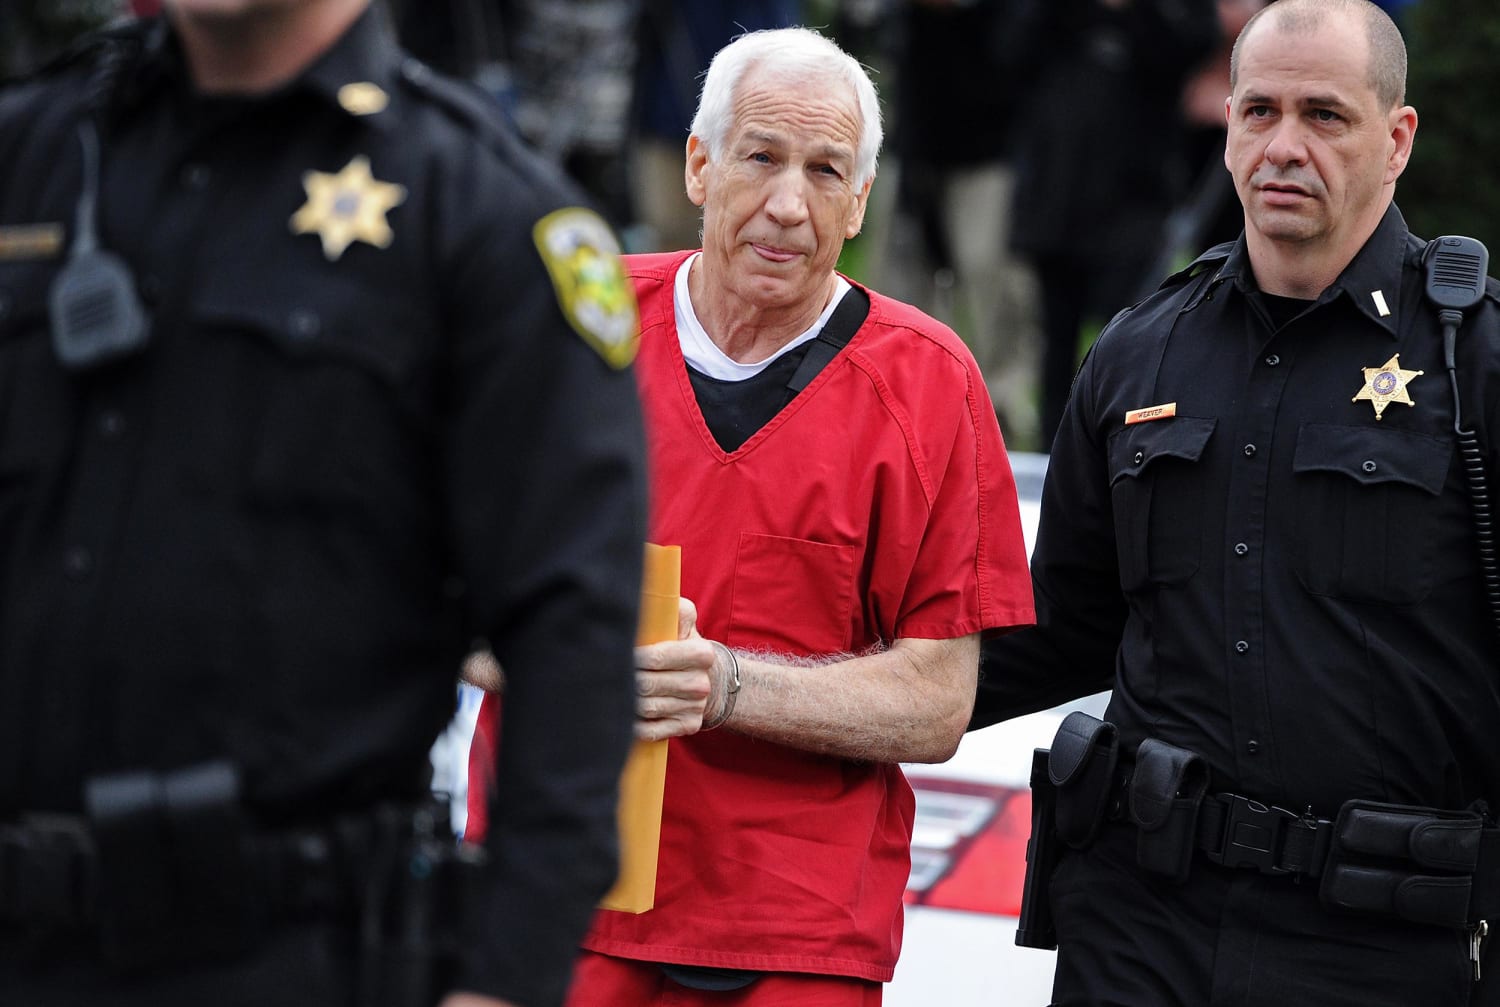 Jerry Sandusky, Ex-Penn State Football Coach, Denied New Trial on Sex Abuse  Charges